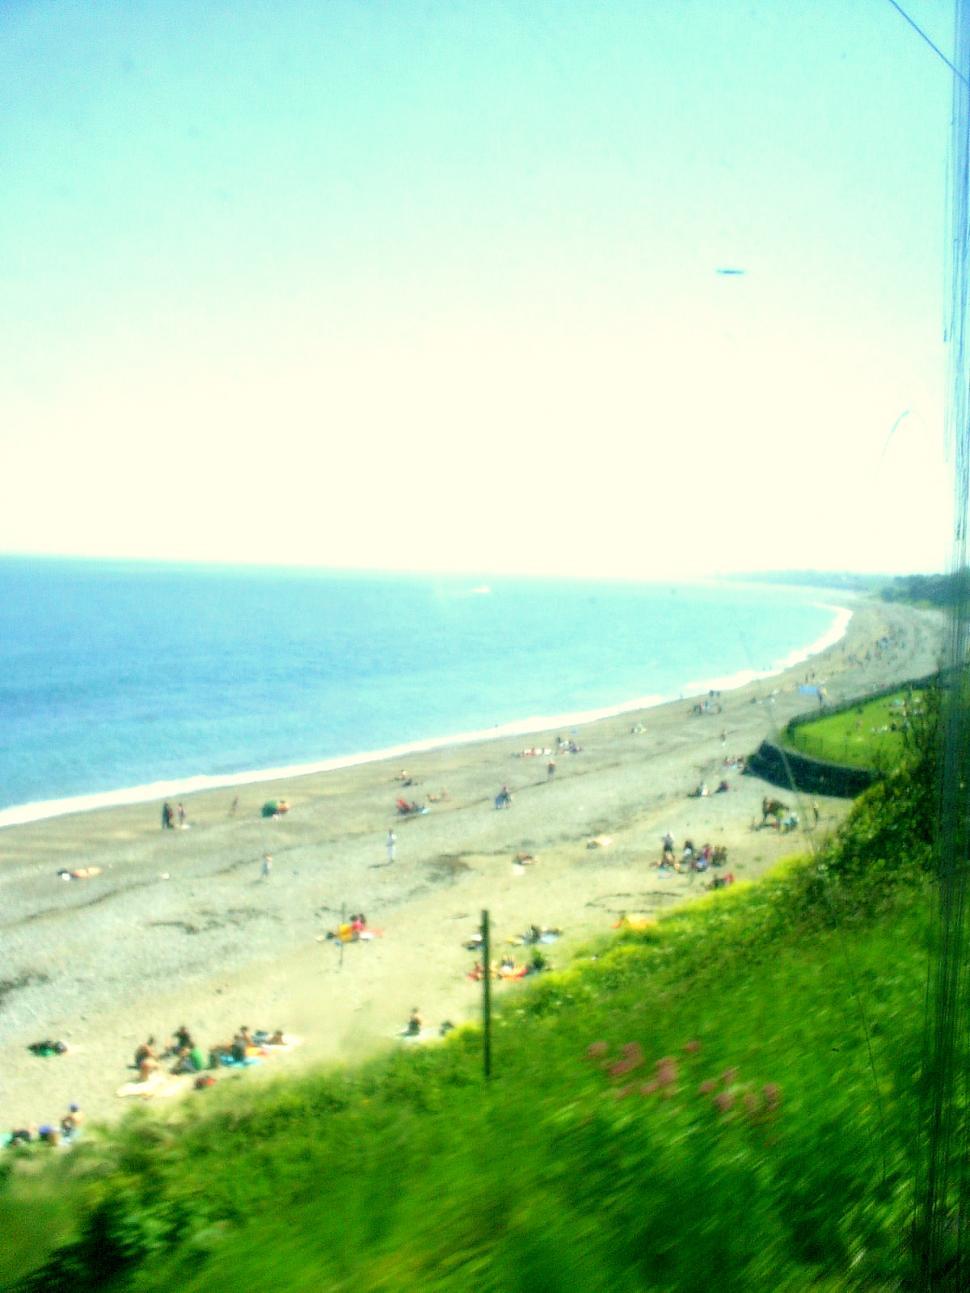 Free Image of A View of a Beach From a Train Window 